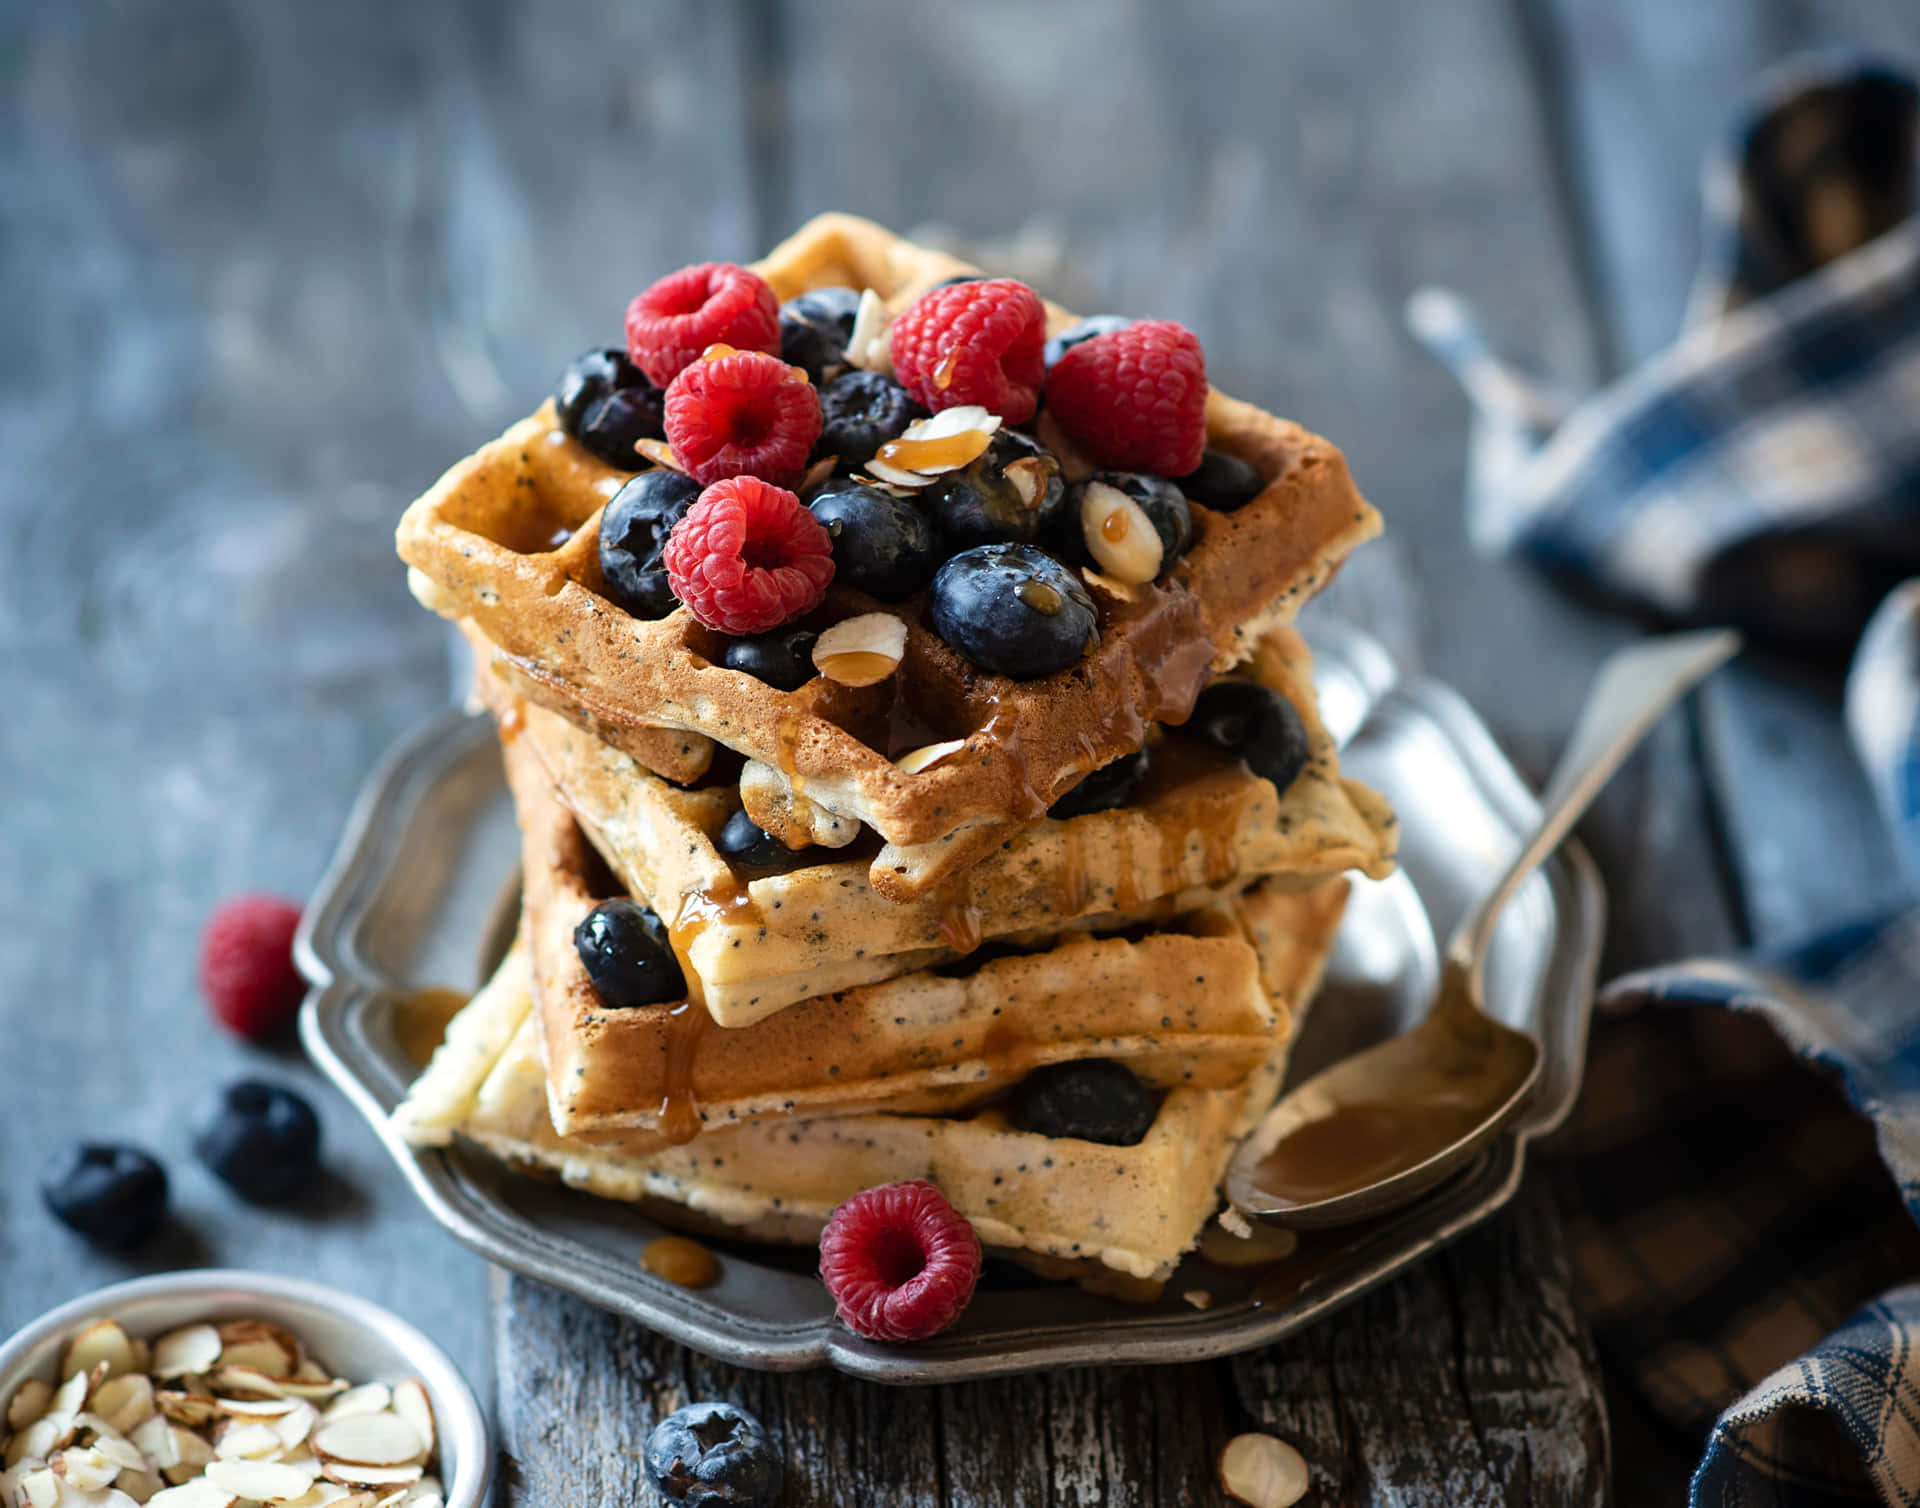 Delicious Golden Waffle Stack